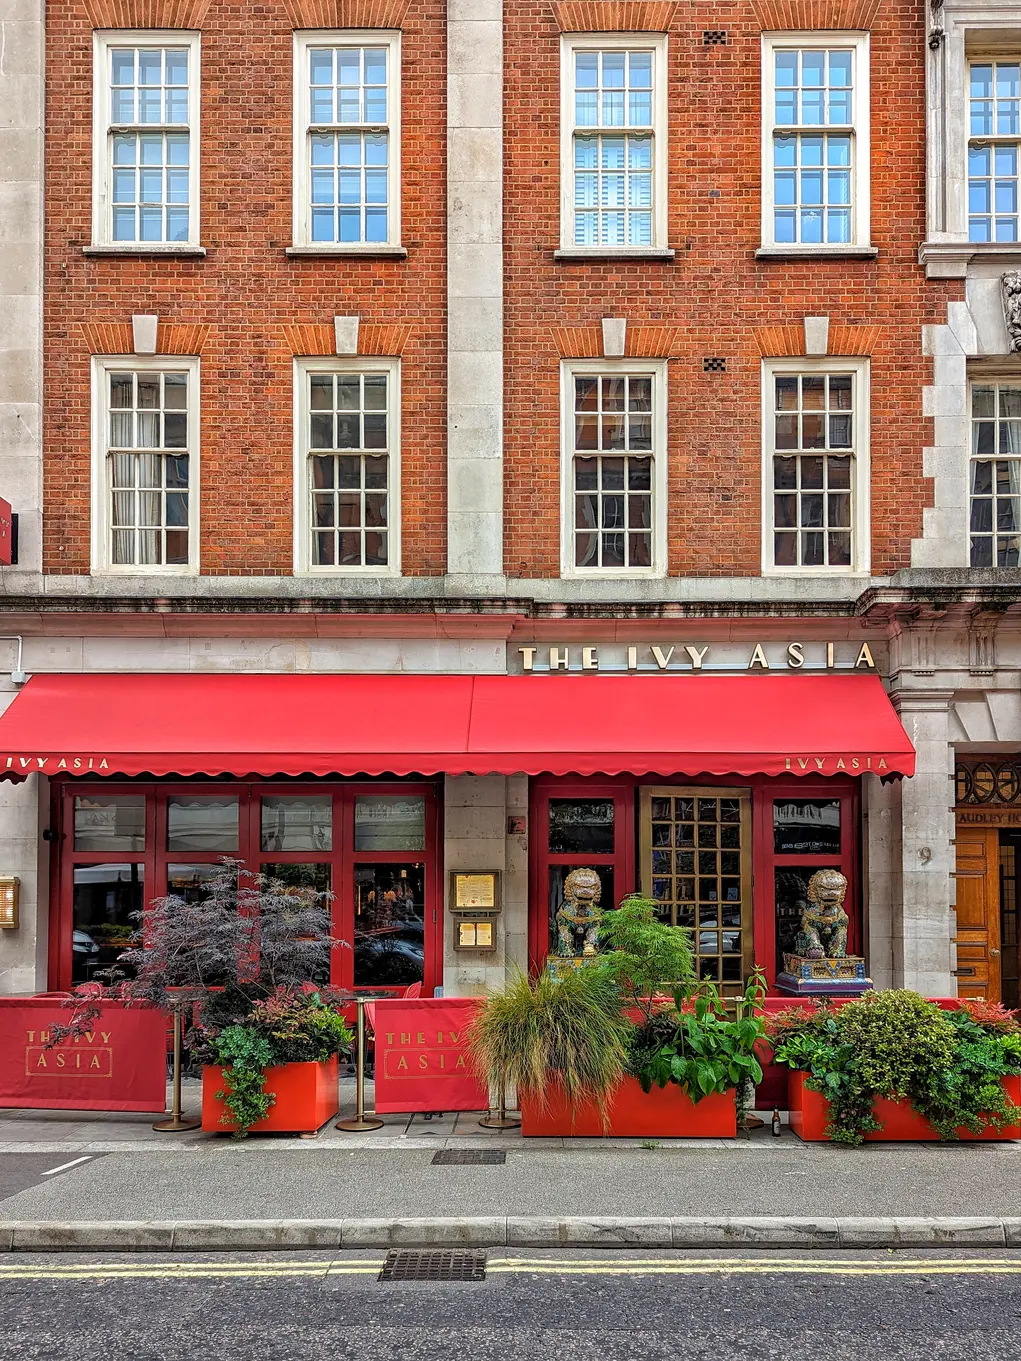 The outdoor terrace of The Ivy Asia with a red awning and planters